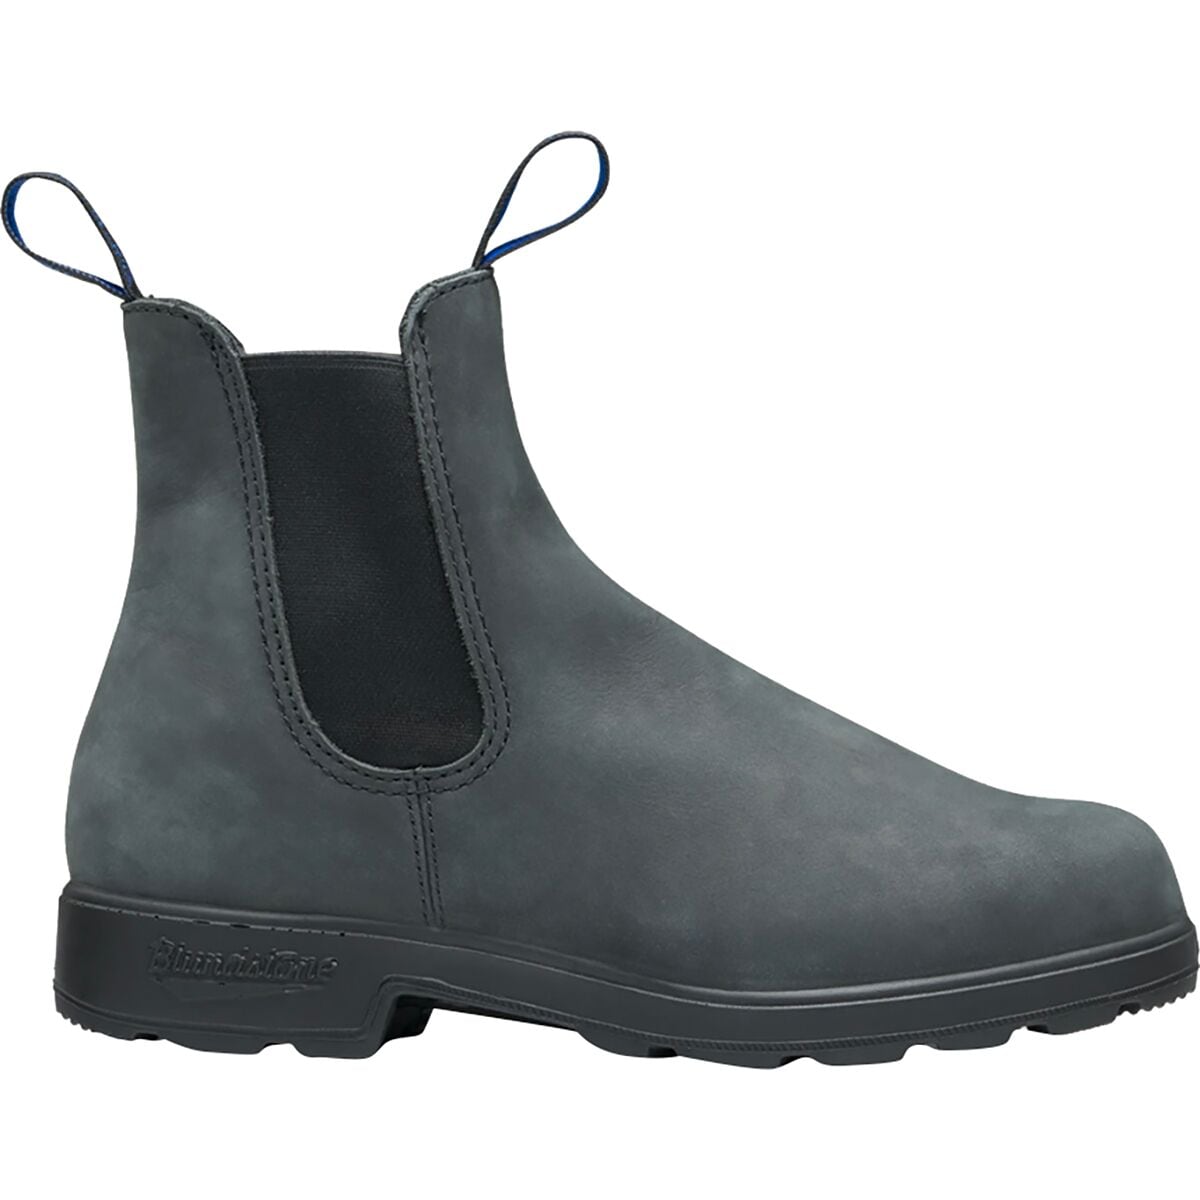 Blundstone Thermal High Top Boot - Women's | Backcountry